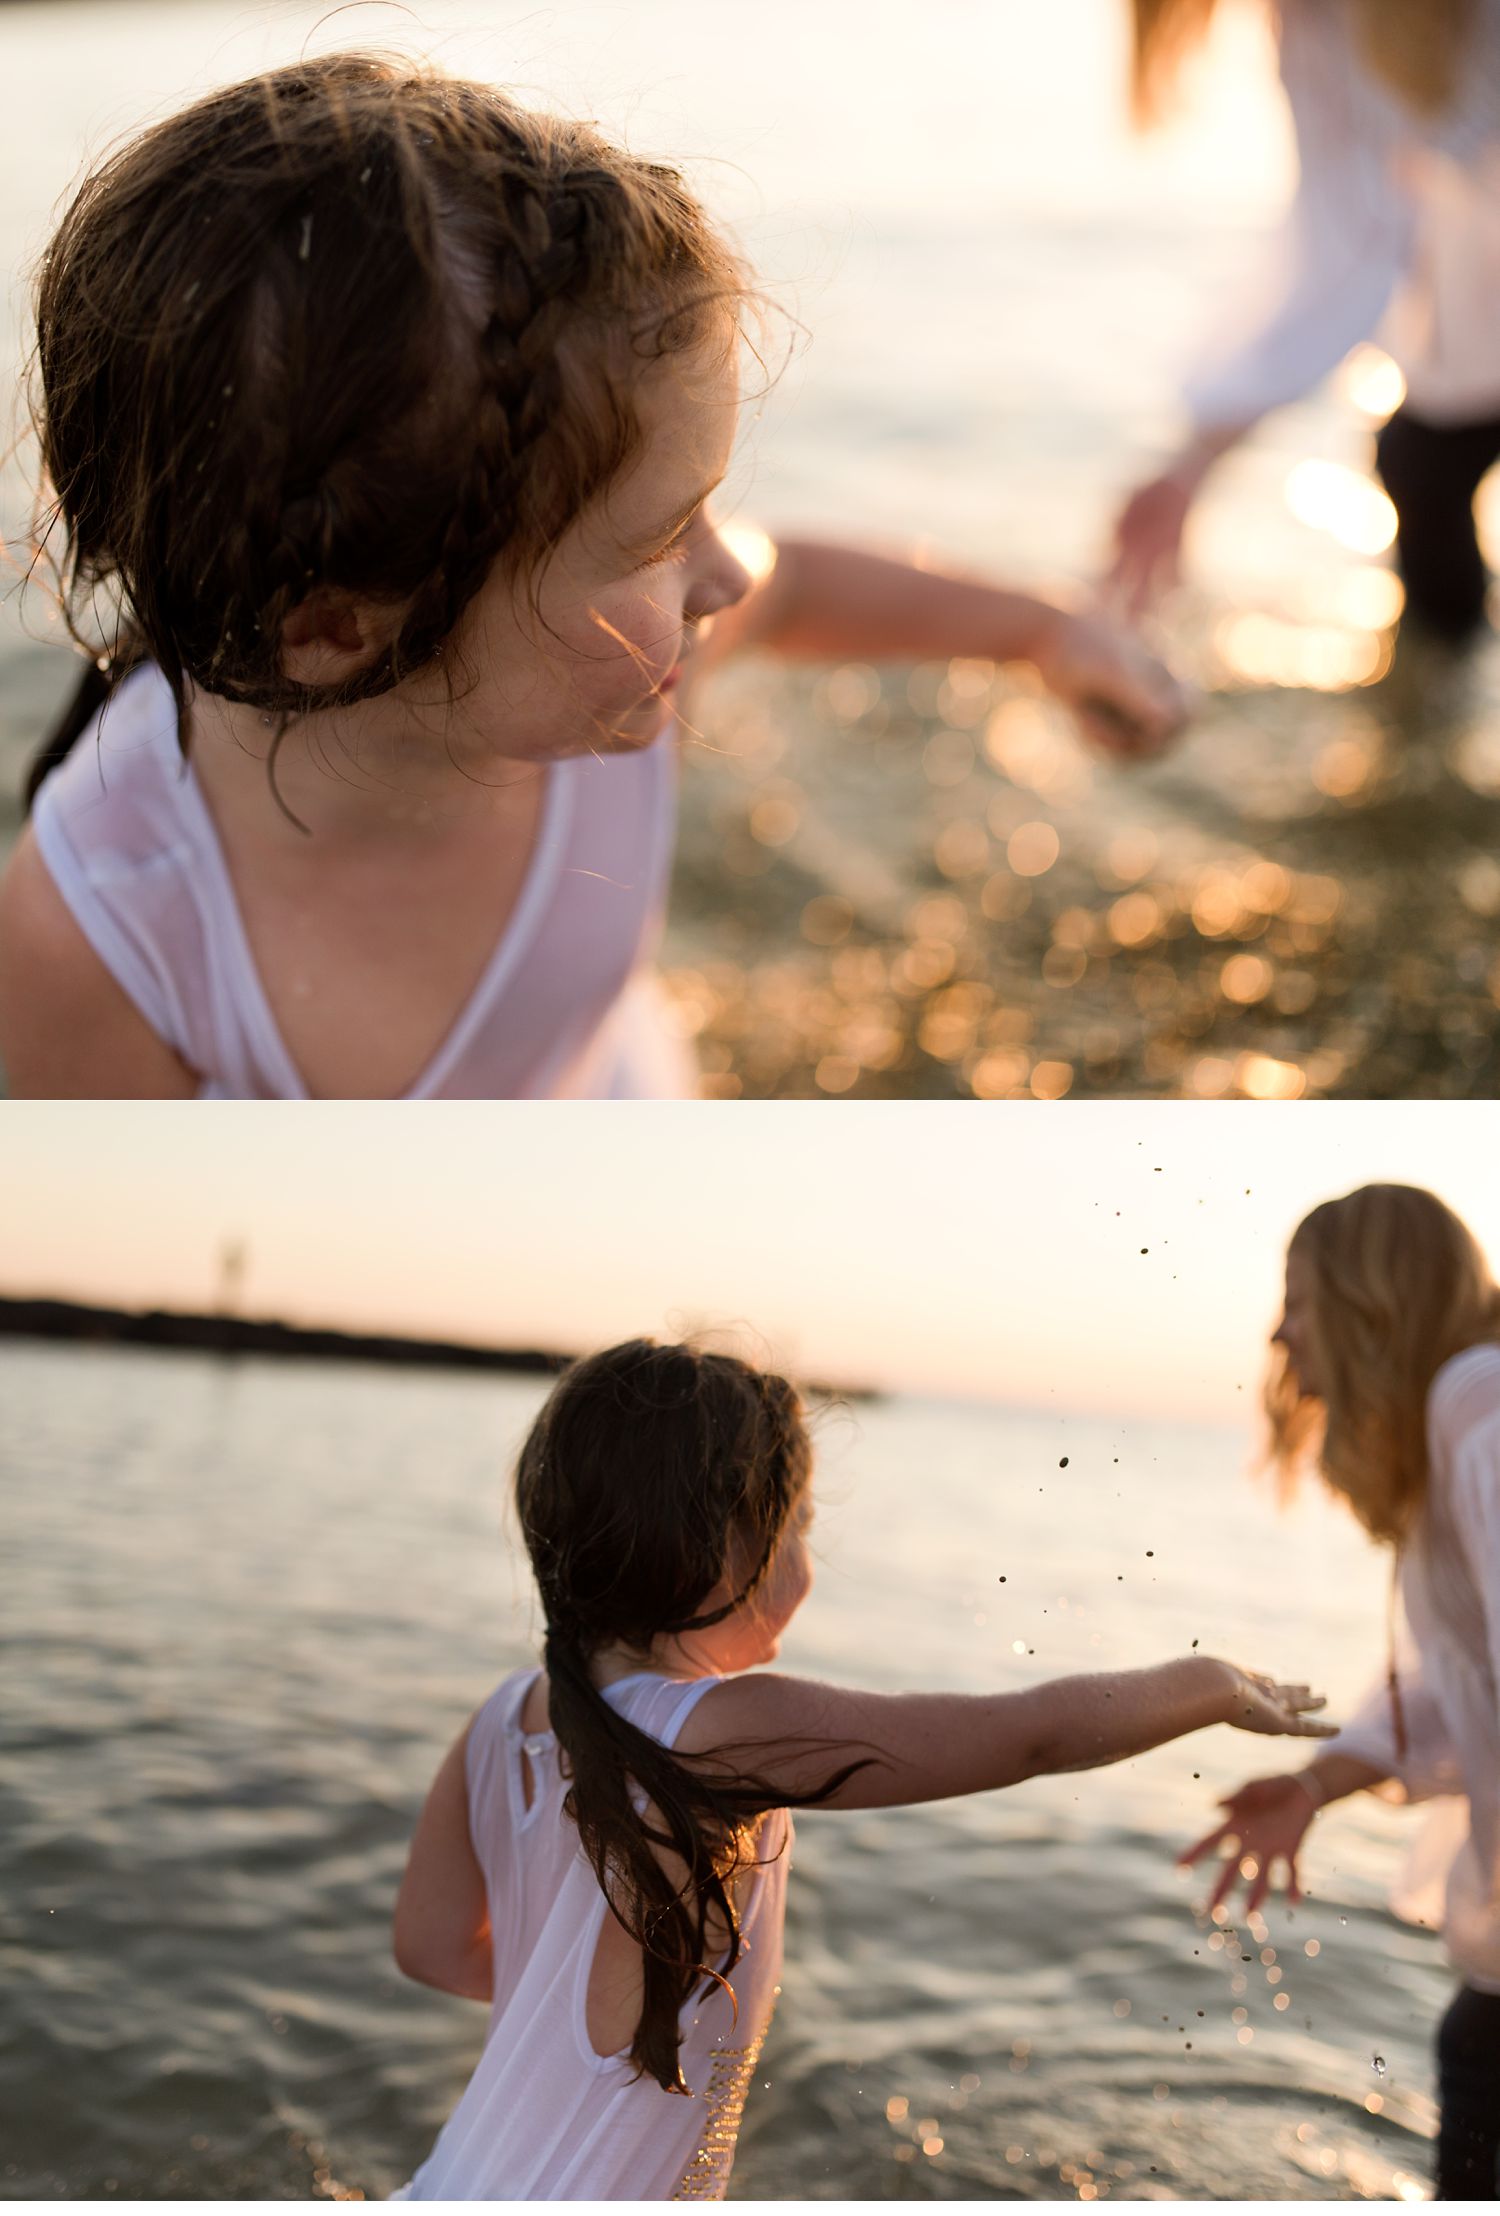 True-family-moments-photography-melbourne.jpg